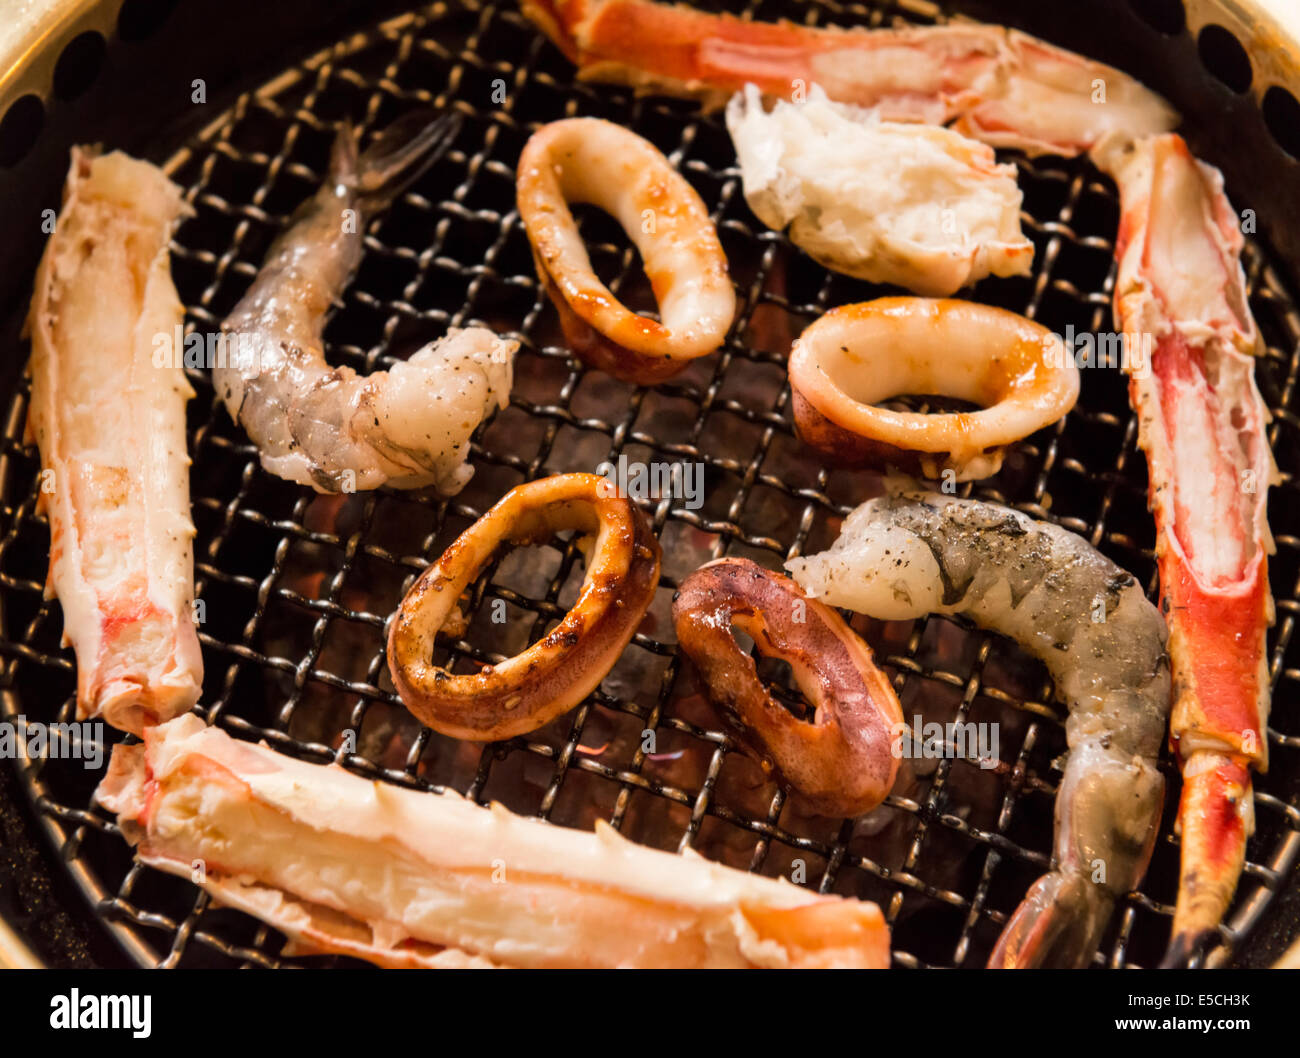 Closeup of seafood being cooked on a Japanese grill stove at a restaurant Stock Photo